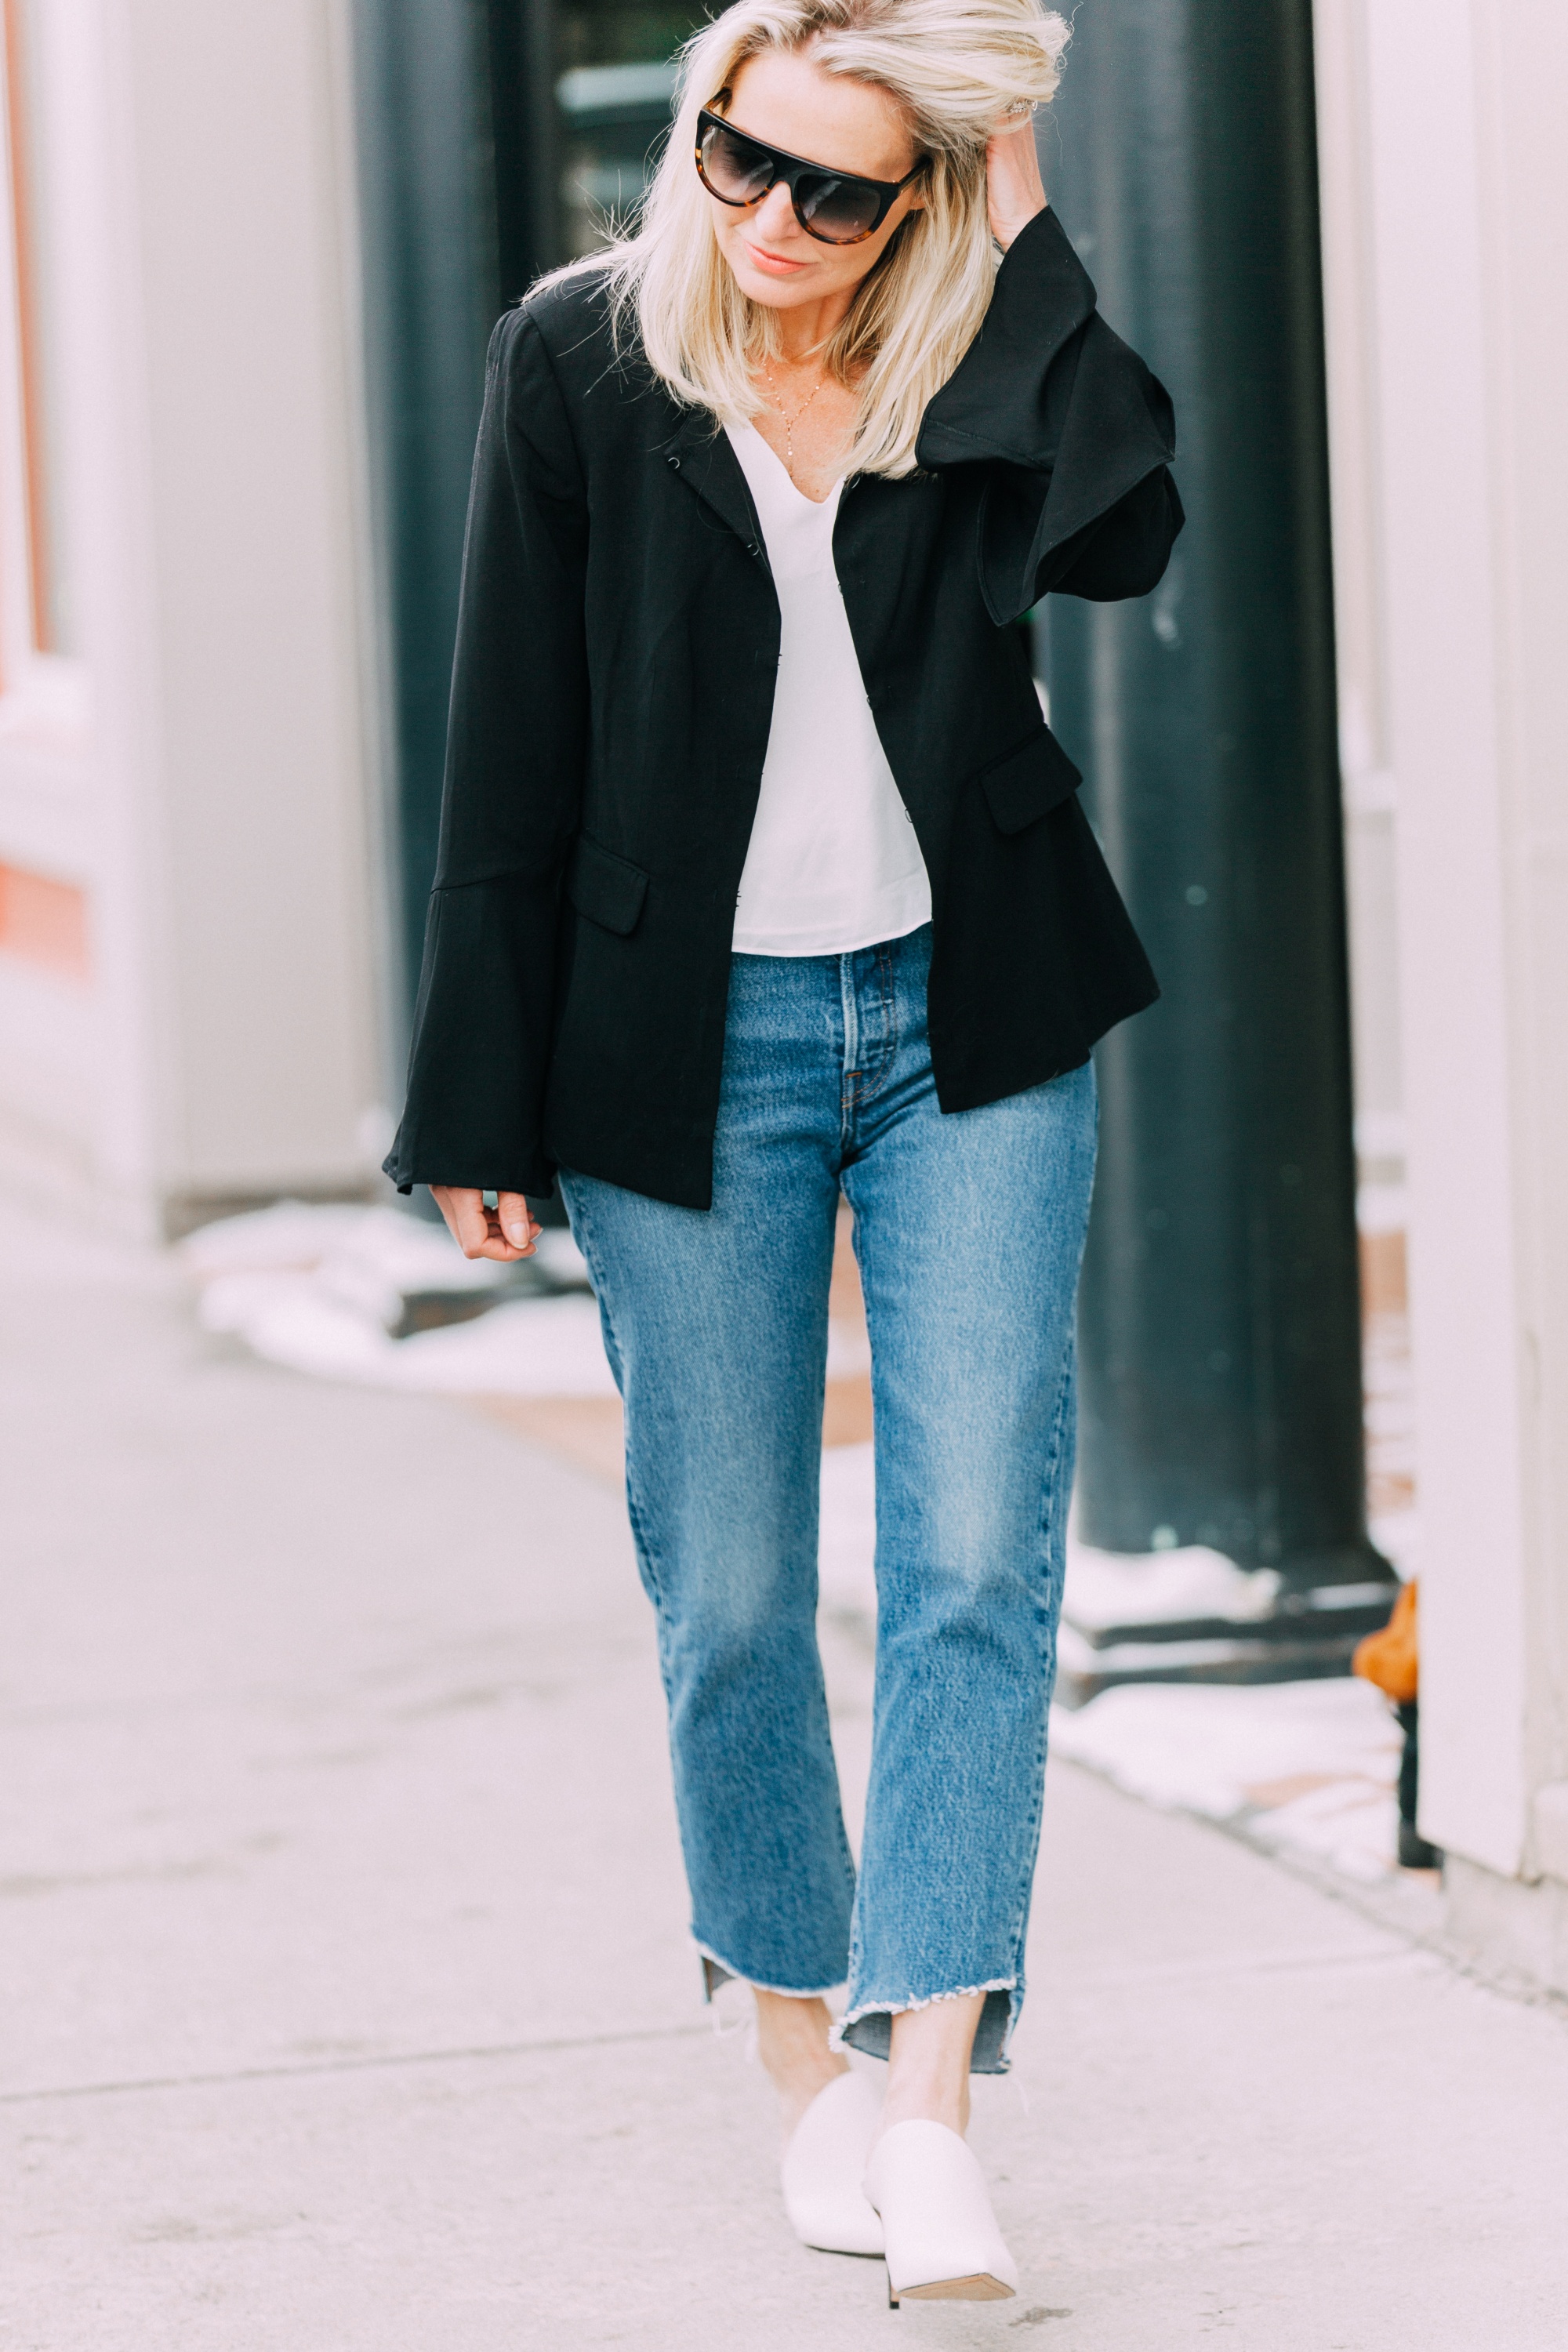 Spring Fashion, Fashion blogger Erin Busbee of BusbeeStyle.com wearing Le Gali black flare sleeve jacket, Levi jeans, AQUA tank, and Via Spiga white mules from Bloomingdale's walking in Telluride, CO